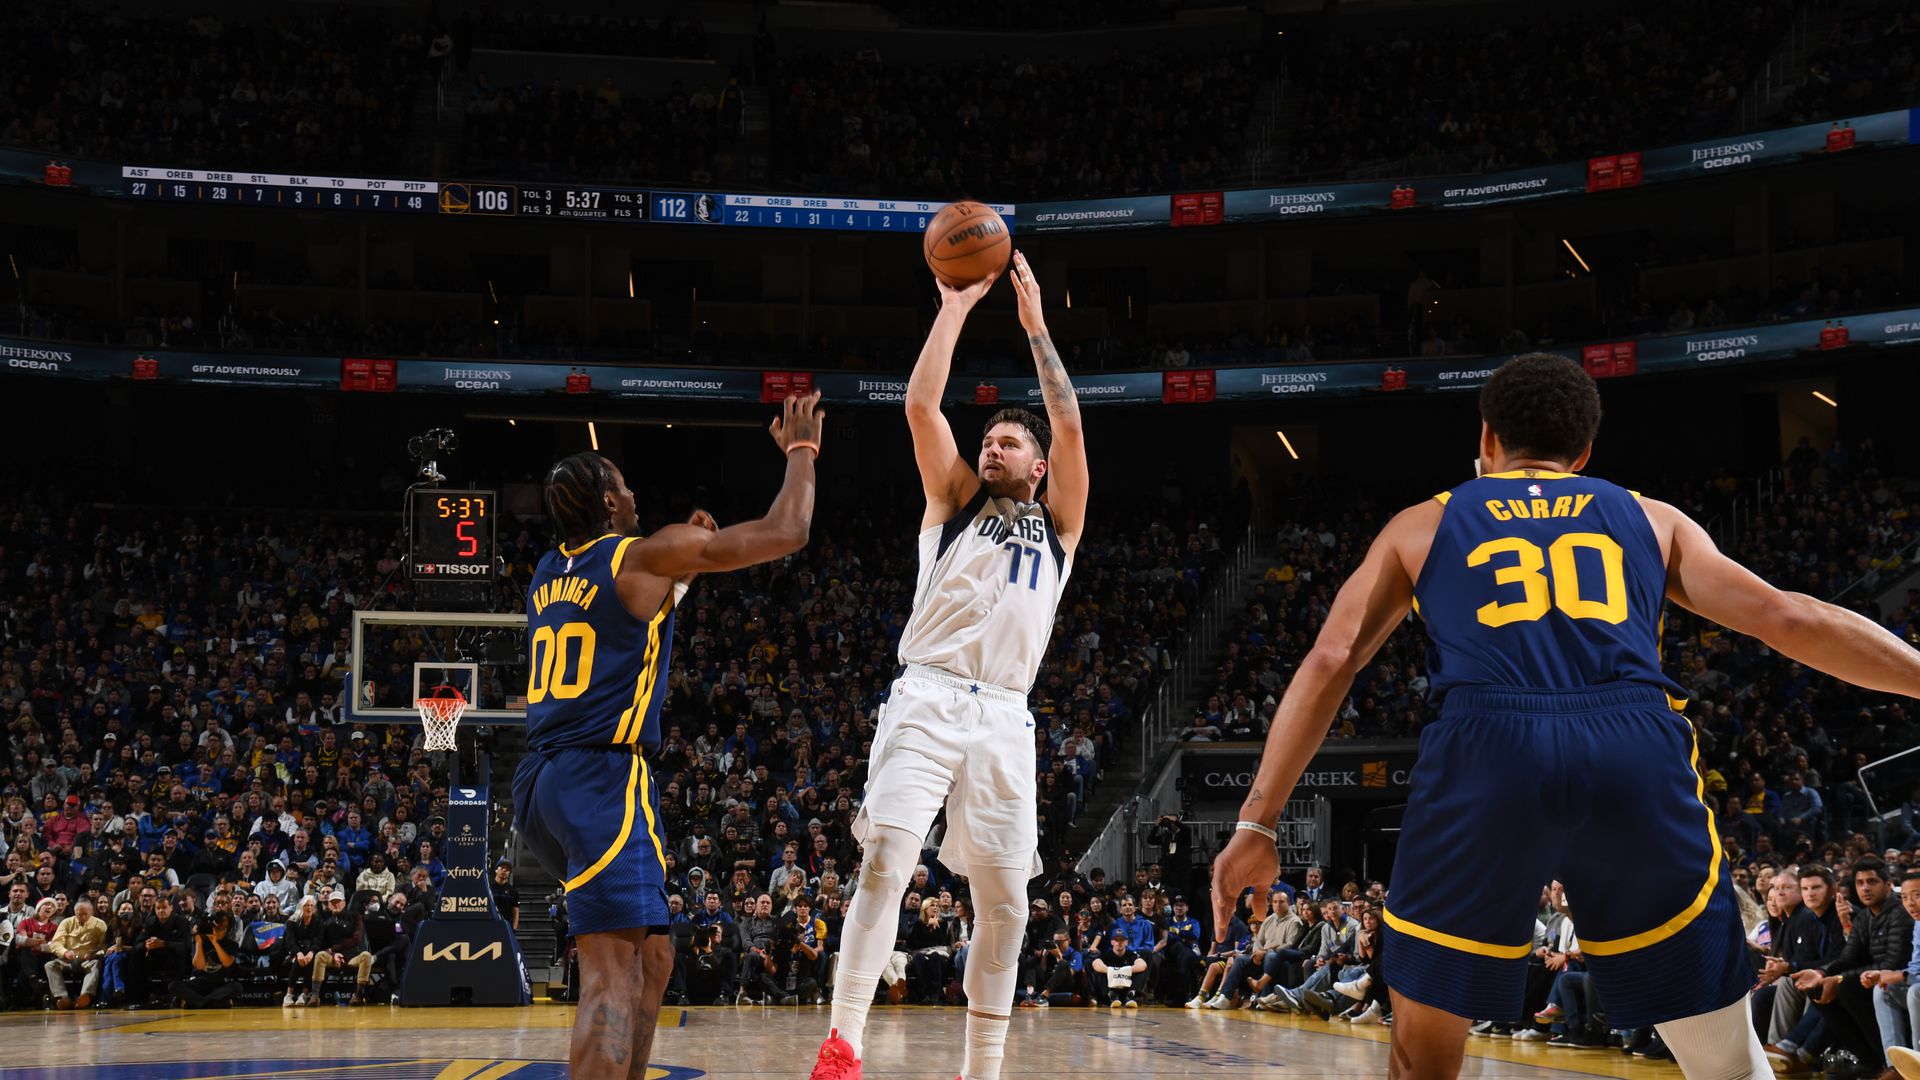 mavericks vs warriors recap: 3 observations from a fun 132-122 victory in golden state